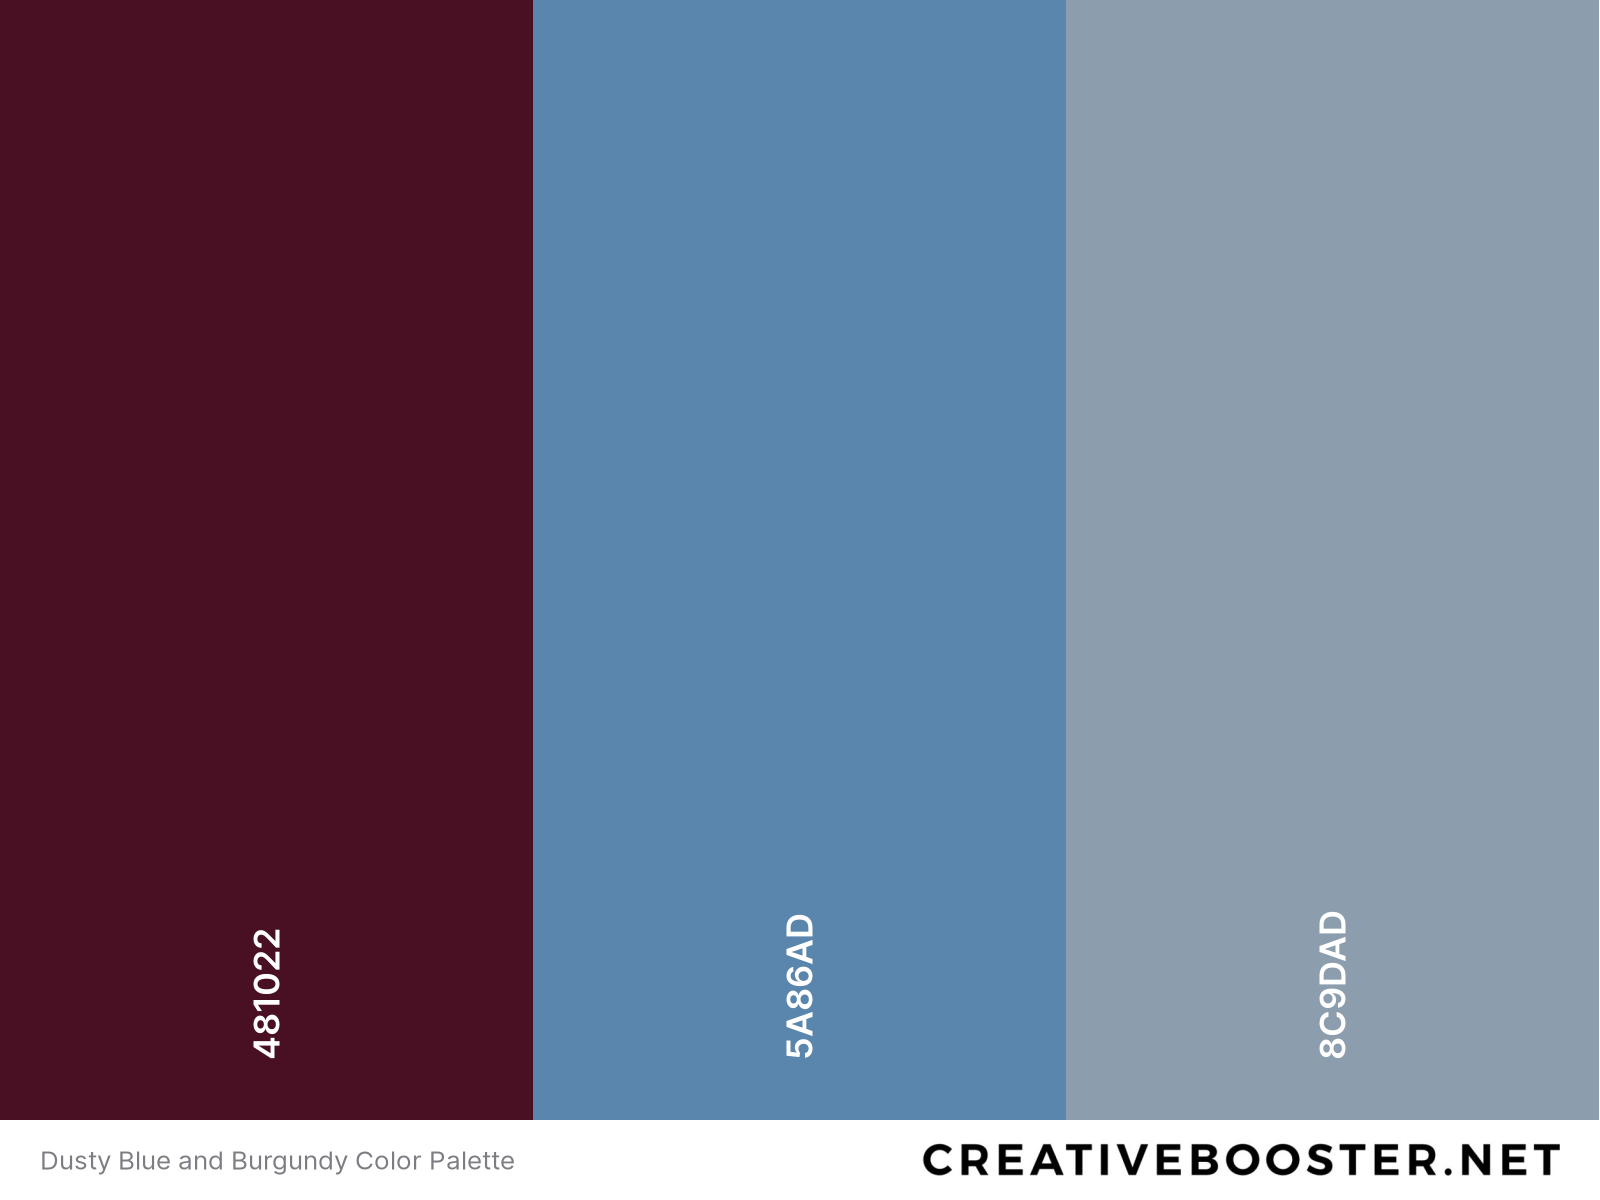 Dusty Blue and Burgundy Color Palette